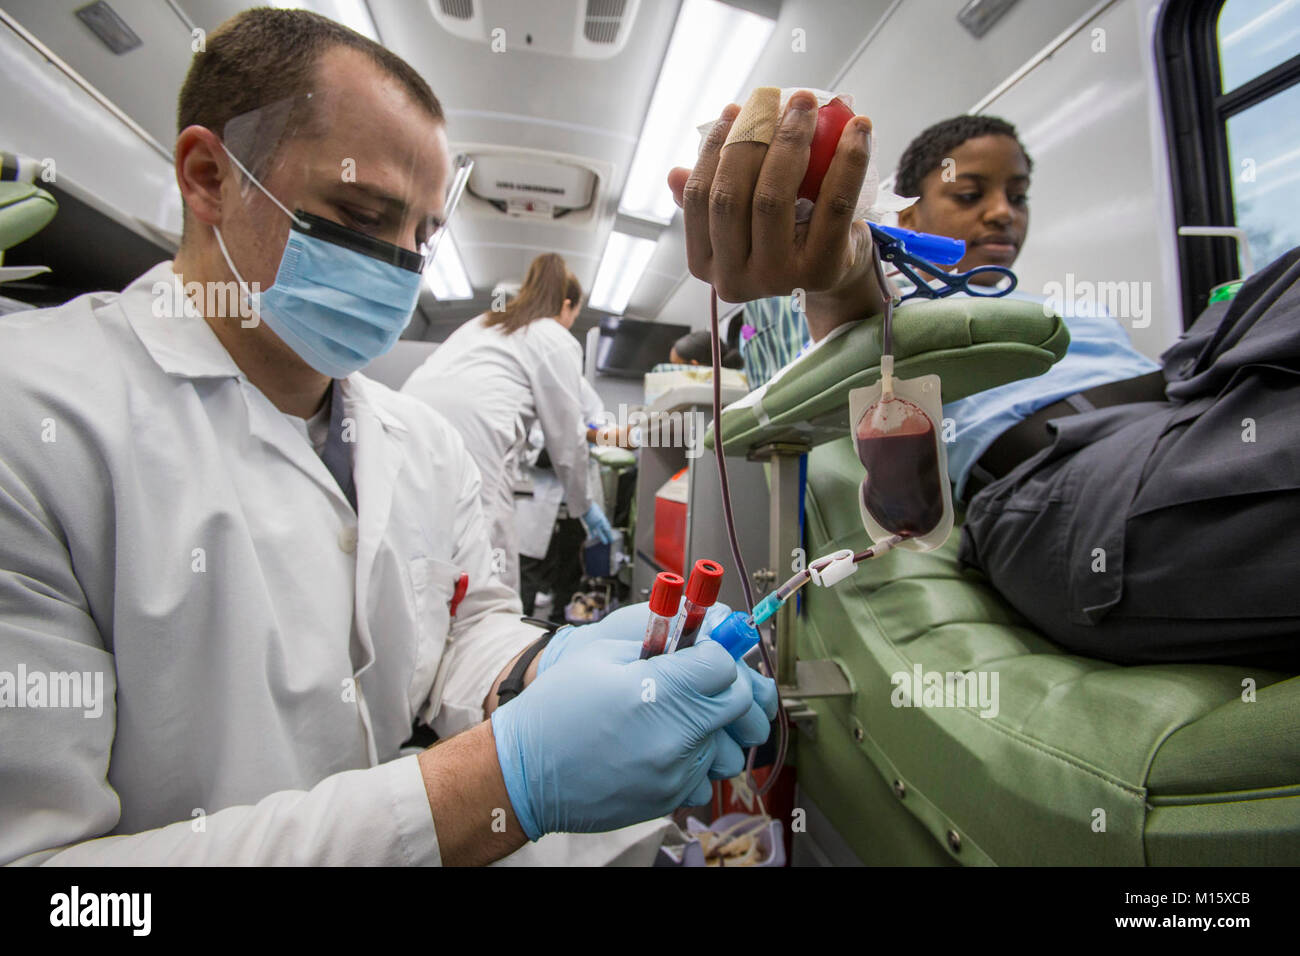 Phlebotomist Kevin Clark, left, Miller Keystone Blood Center, Ewing, N.J., takes blood samples from Cadet Tatiana Constant during a blood drive at the New Jersey National Guard Youth ChalleNGe Academy at Joint Base McGuire-Dix-Lakehurst, N.J., Jan. 24, 2018. The Youth ChalleNGe Academy is an education program that provides 16 to 18 year-old high school dropouts the opportunity to undergo an intense 22-week structured residential program in a quasi-military environment and prepares them for the GED exam. (New Jersey National Guard Stock Photo